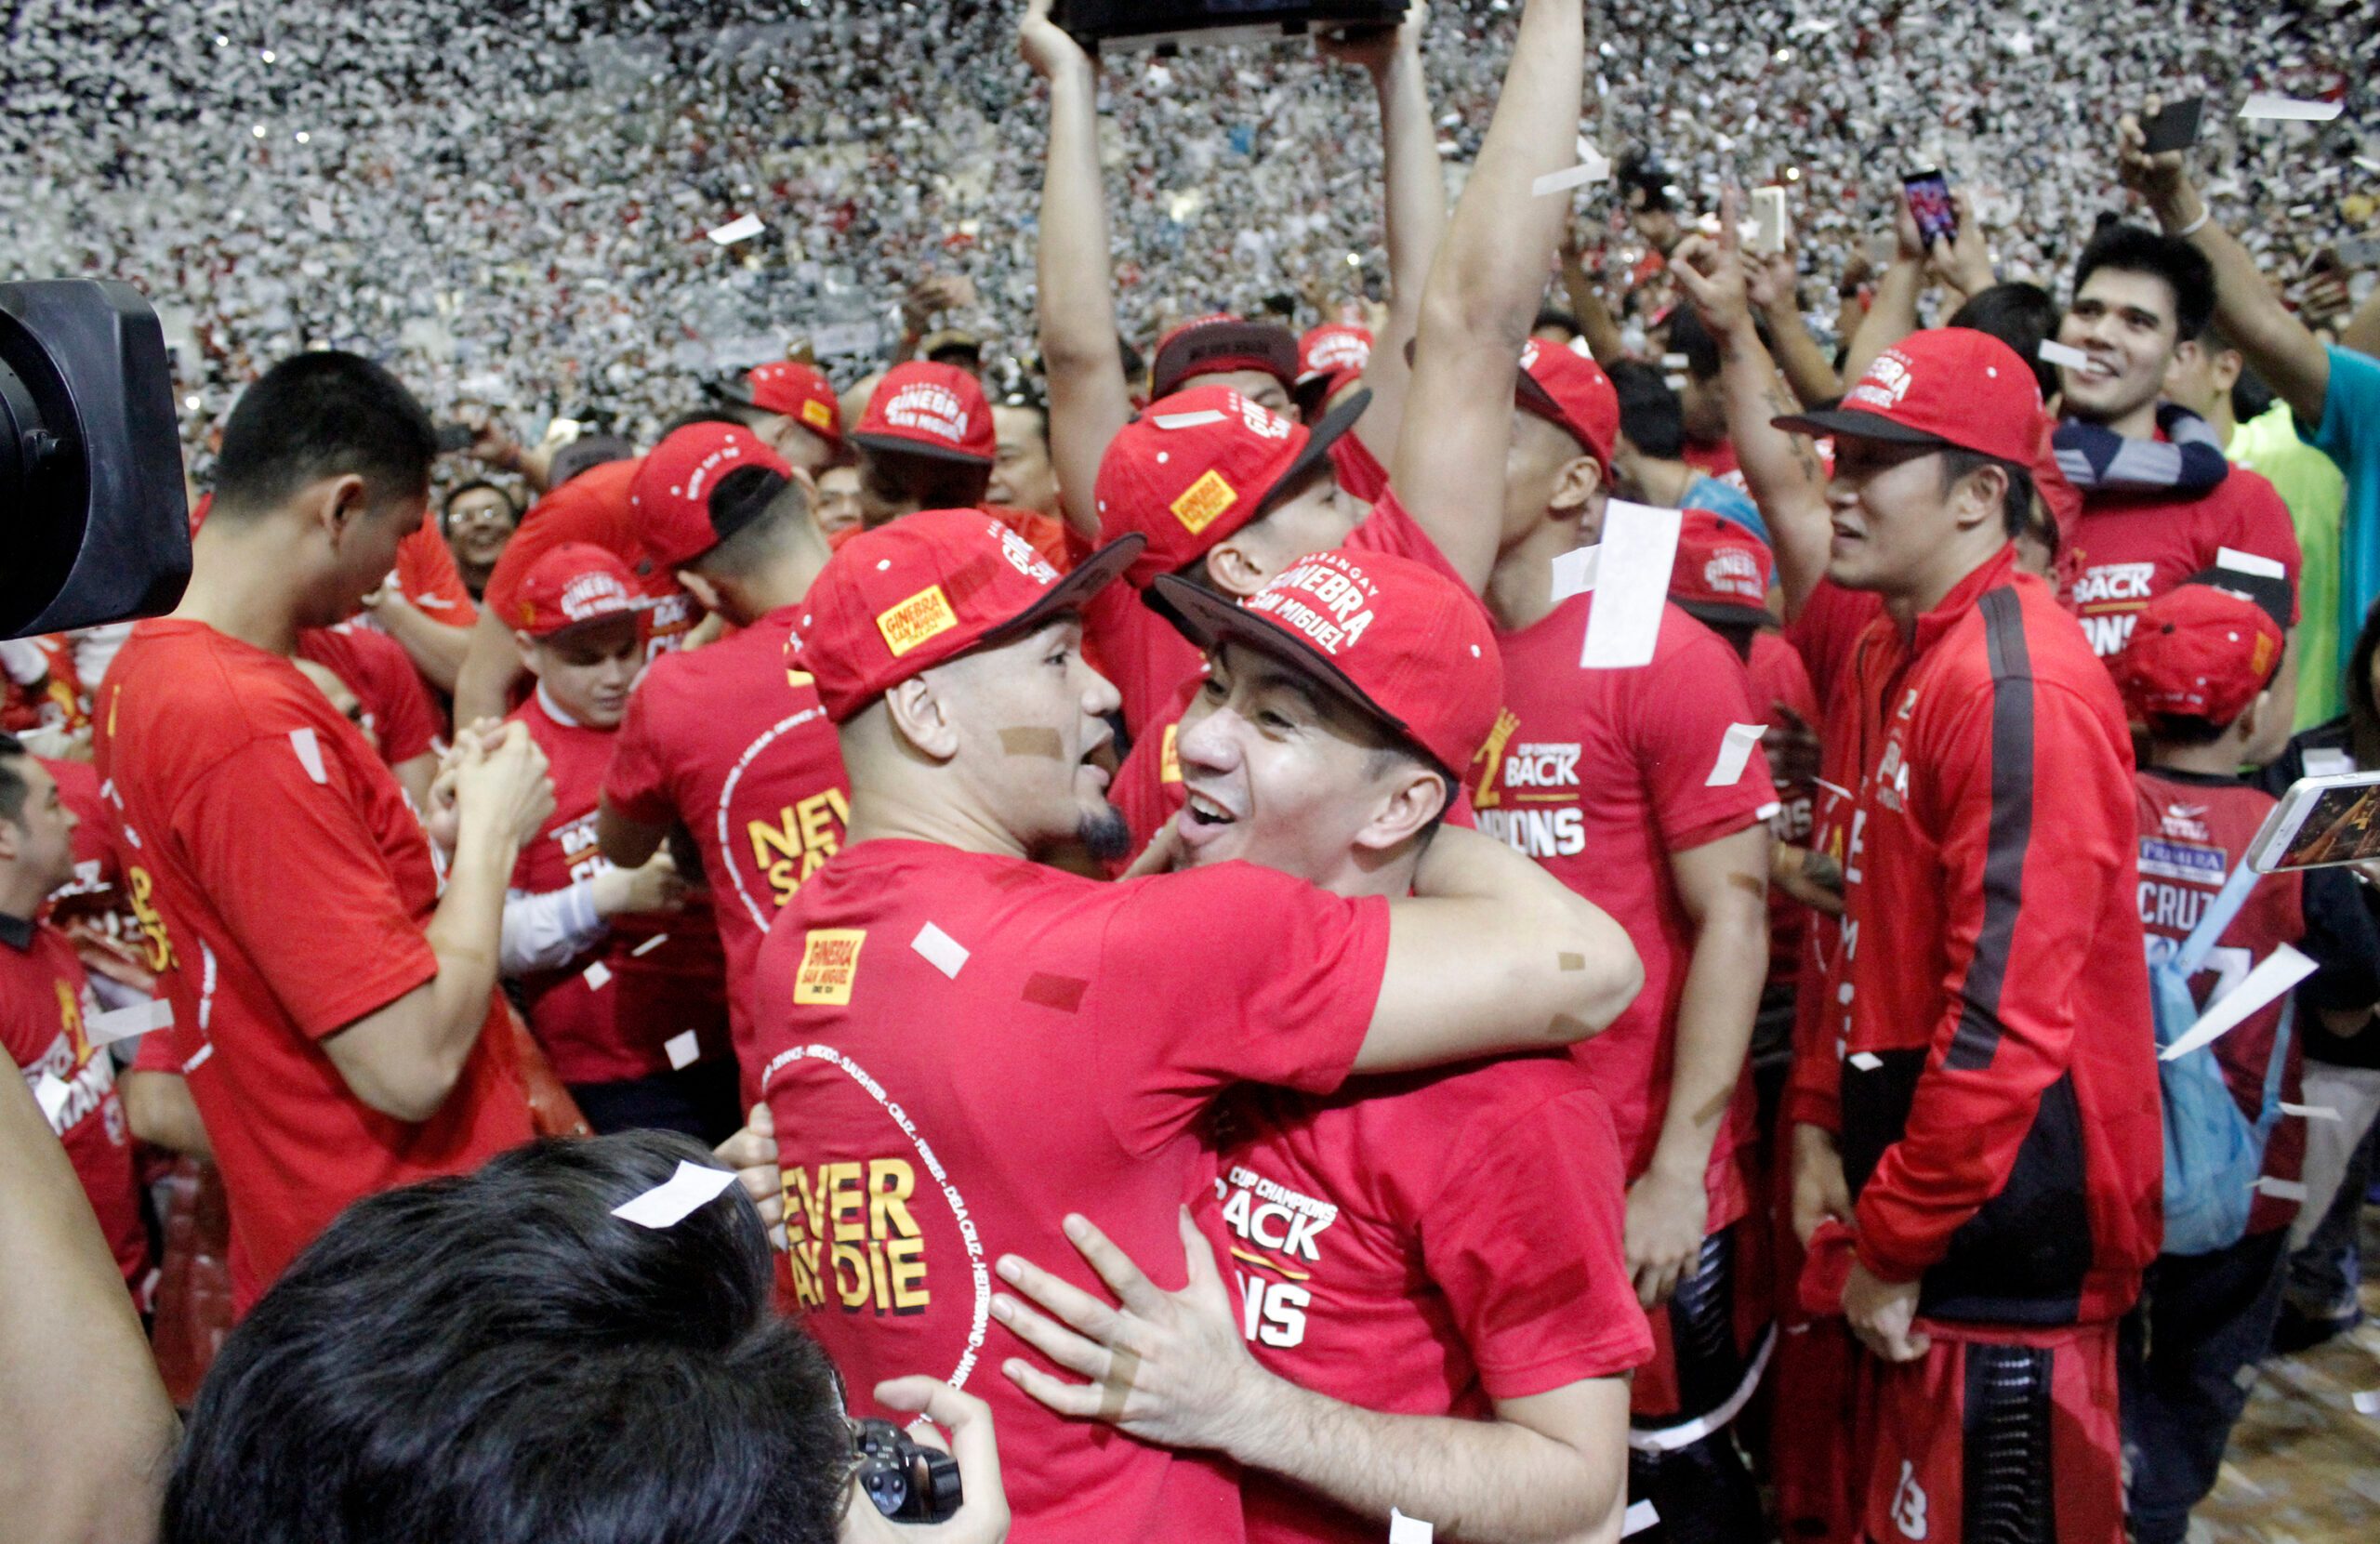 IN PHOTOS: Barangay Ginebra celebrates second straight Governors’ Cup championship